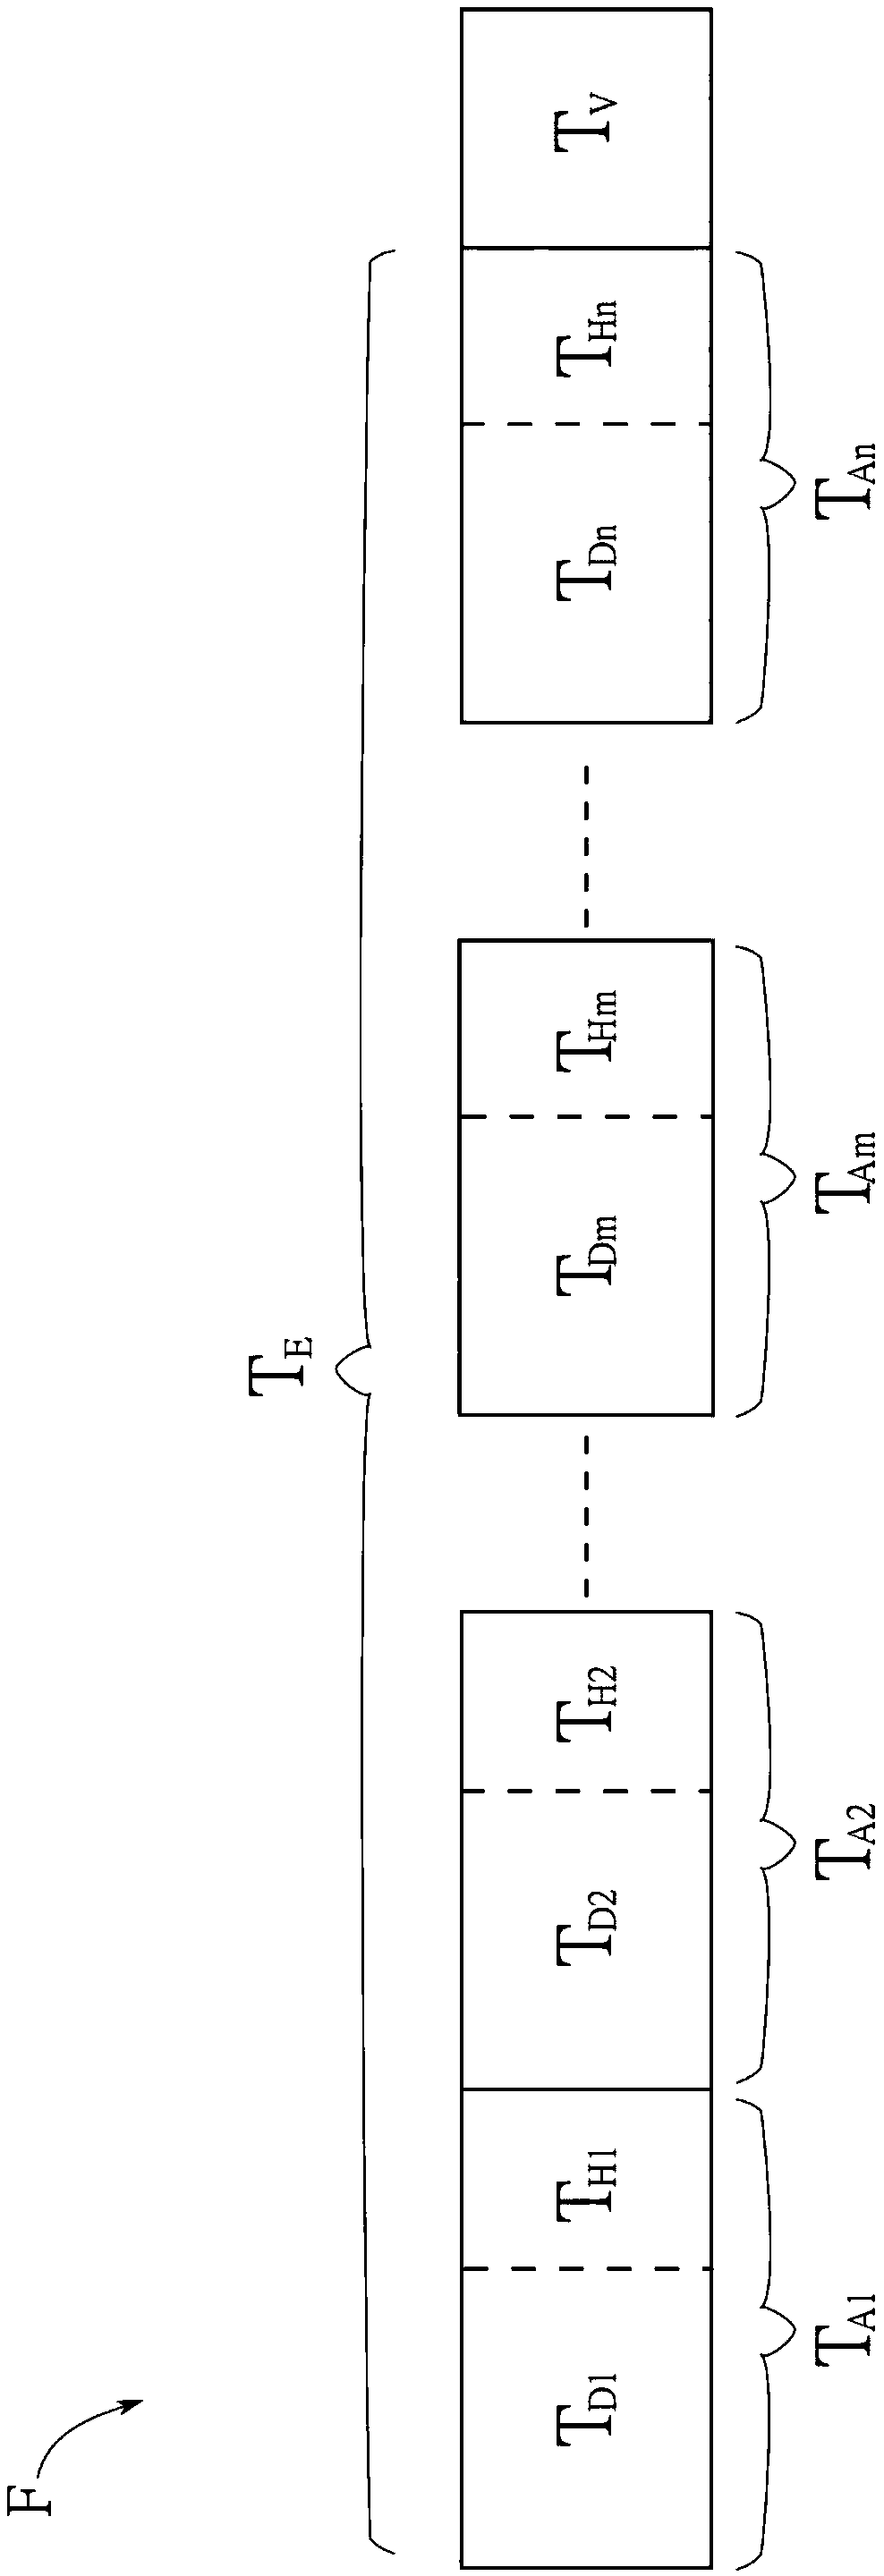 Touch sensing method for display with touch device